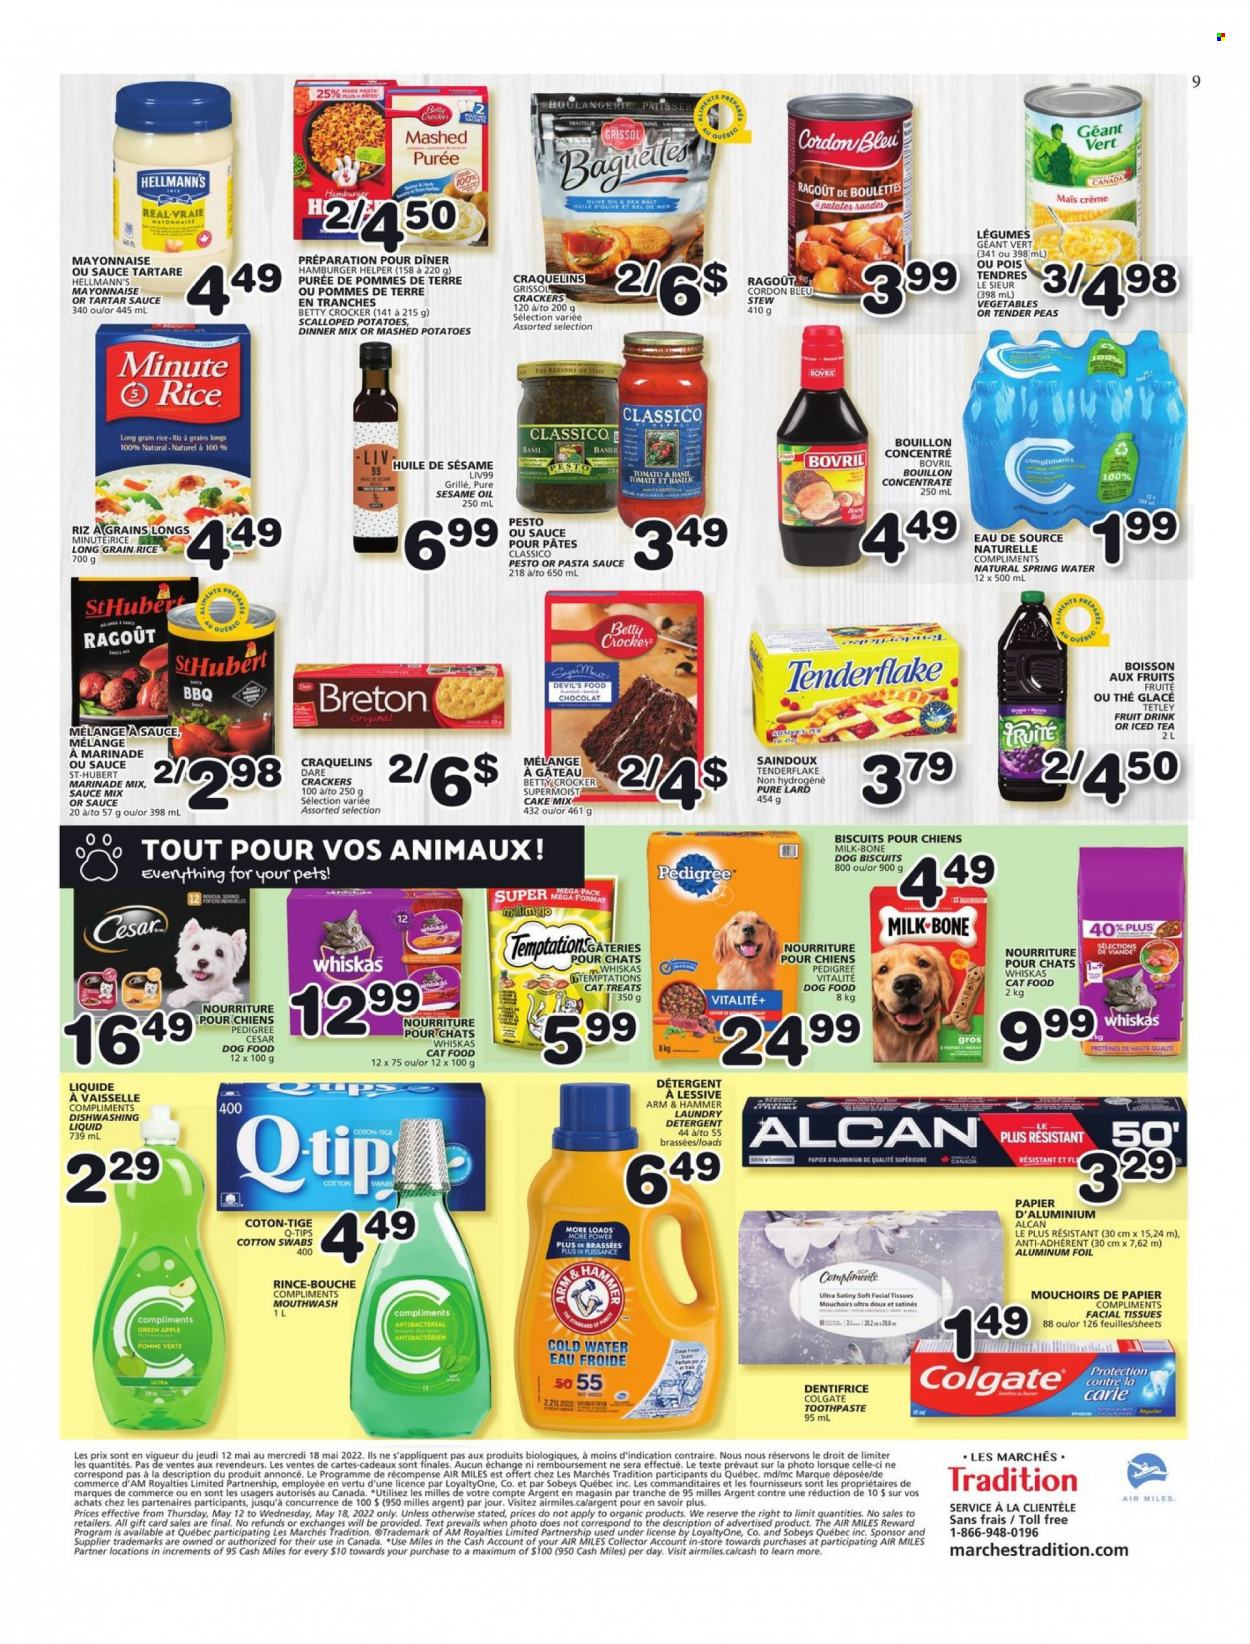 thumbnail - Les Marchés Tradition Flyer - May 12, 2022 - May 18, 2022 - Sales products - cake, peas, mashed potatoes, pasta sauce, milk, mayonnaise, tartar sauce, Hellmann’s, crackers, ARM & HAMMER, bouillon, rice, long grain rice, marinade, Classico, sesame oil, olive oil, fruit drink, ice tea, spring water, tissues, laundry detergent, dishwashing liquid, toothpaste, mouthwash, facial tissues, eau de parfum, animal food, animal treats, cat food, dog food, dog biscuits, Pedigree, detergent, Colgate, lard, pesto, Whiskas, cordon bleu. Page 9.